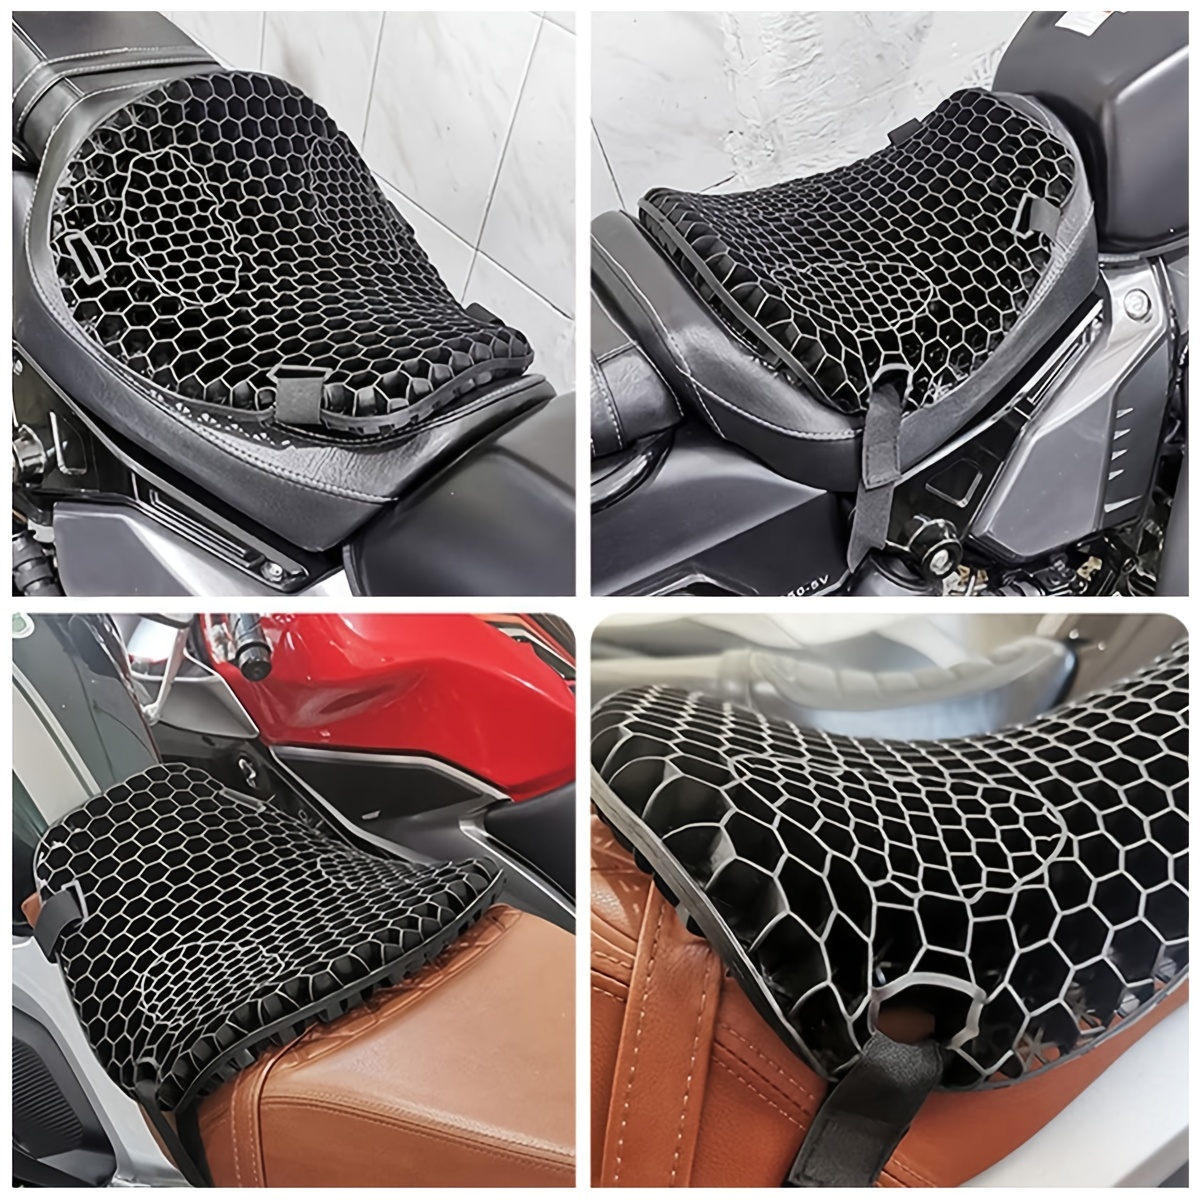 SKYJDM Foldable Motorcycle Gel Seat Cushion Large 3D Honeycomb Structure Shock Absorption Breathable Pad for Long Rides L at MechanicSurplus.com